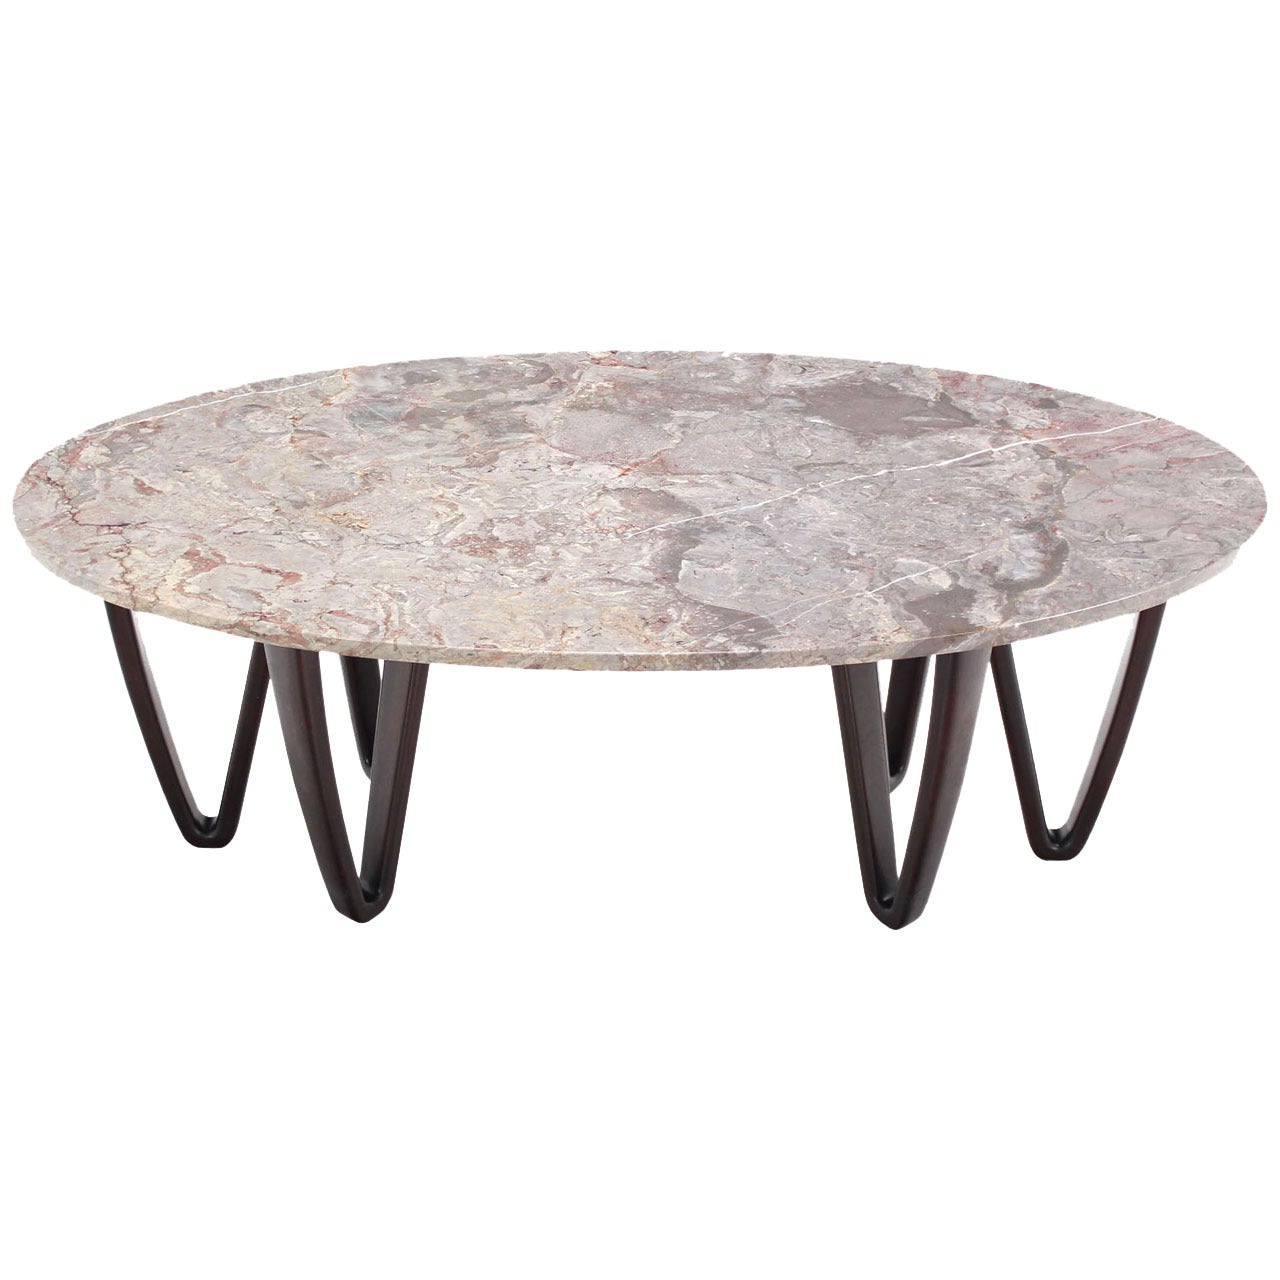 Oval Marble-Top Coffee Table on Wooden Hair Pin Legs